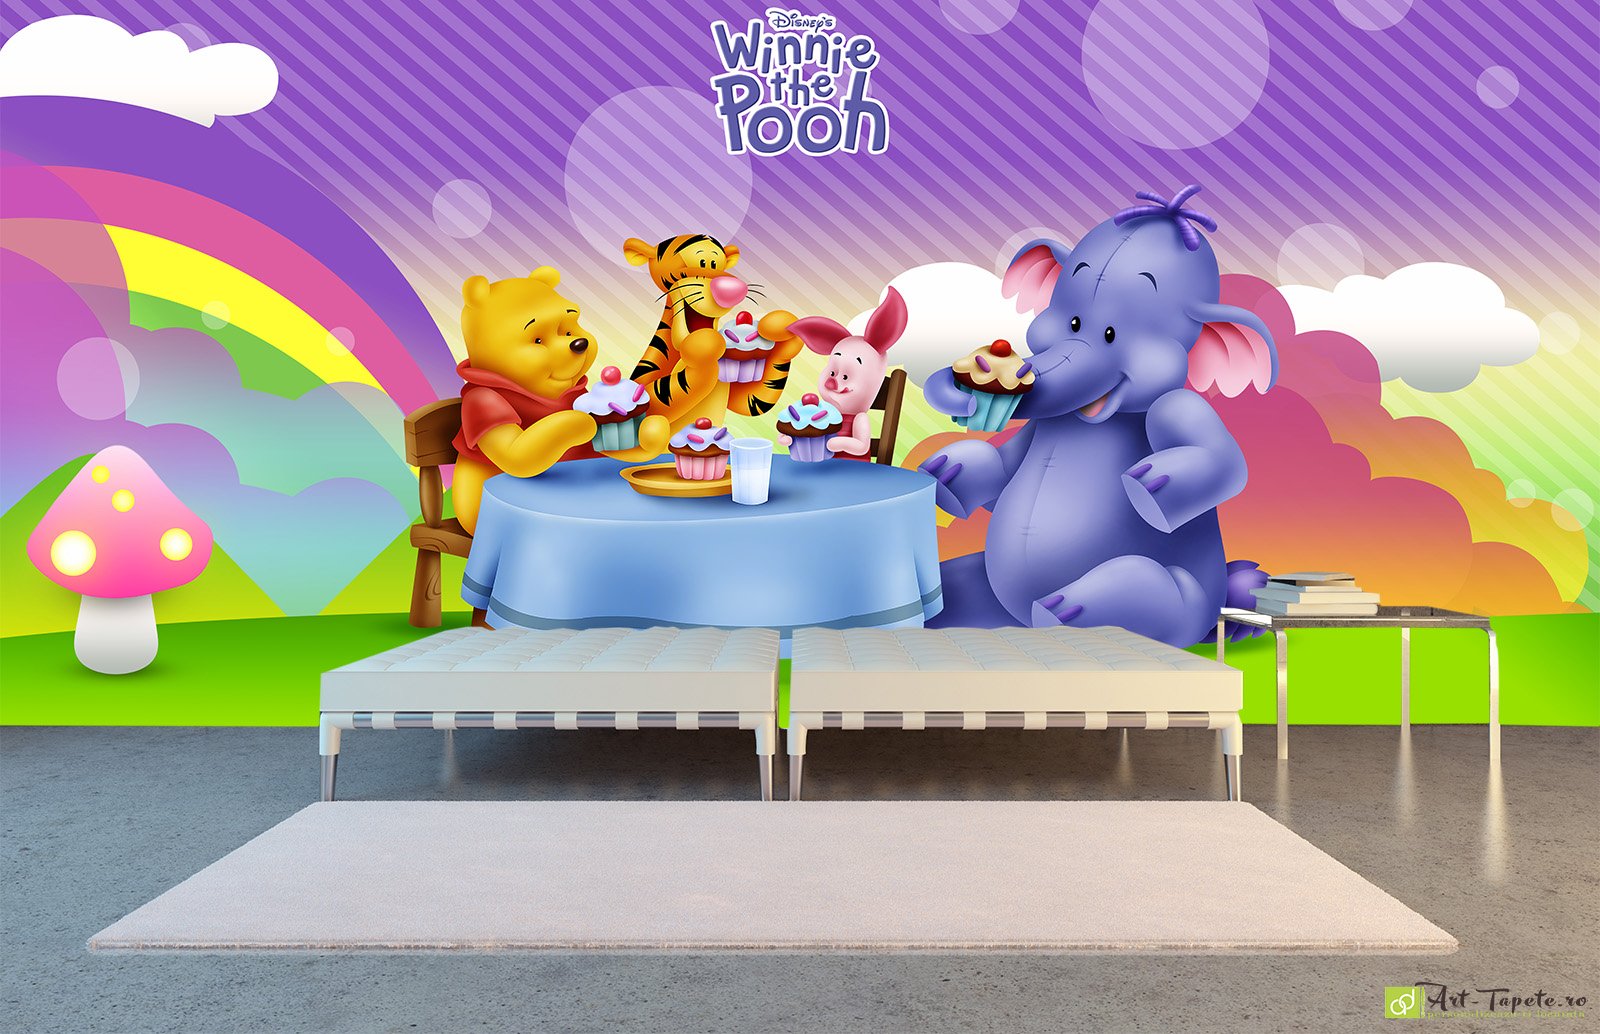 Children's Wallpaper & Wall Murals - Disney, Winnie the Pooh and friends  drink tea  Amazing Digital Wallpapers add dimension and  character for children's bedrooms